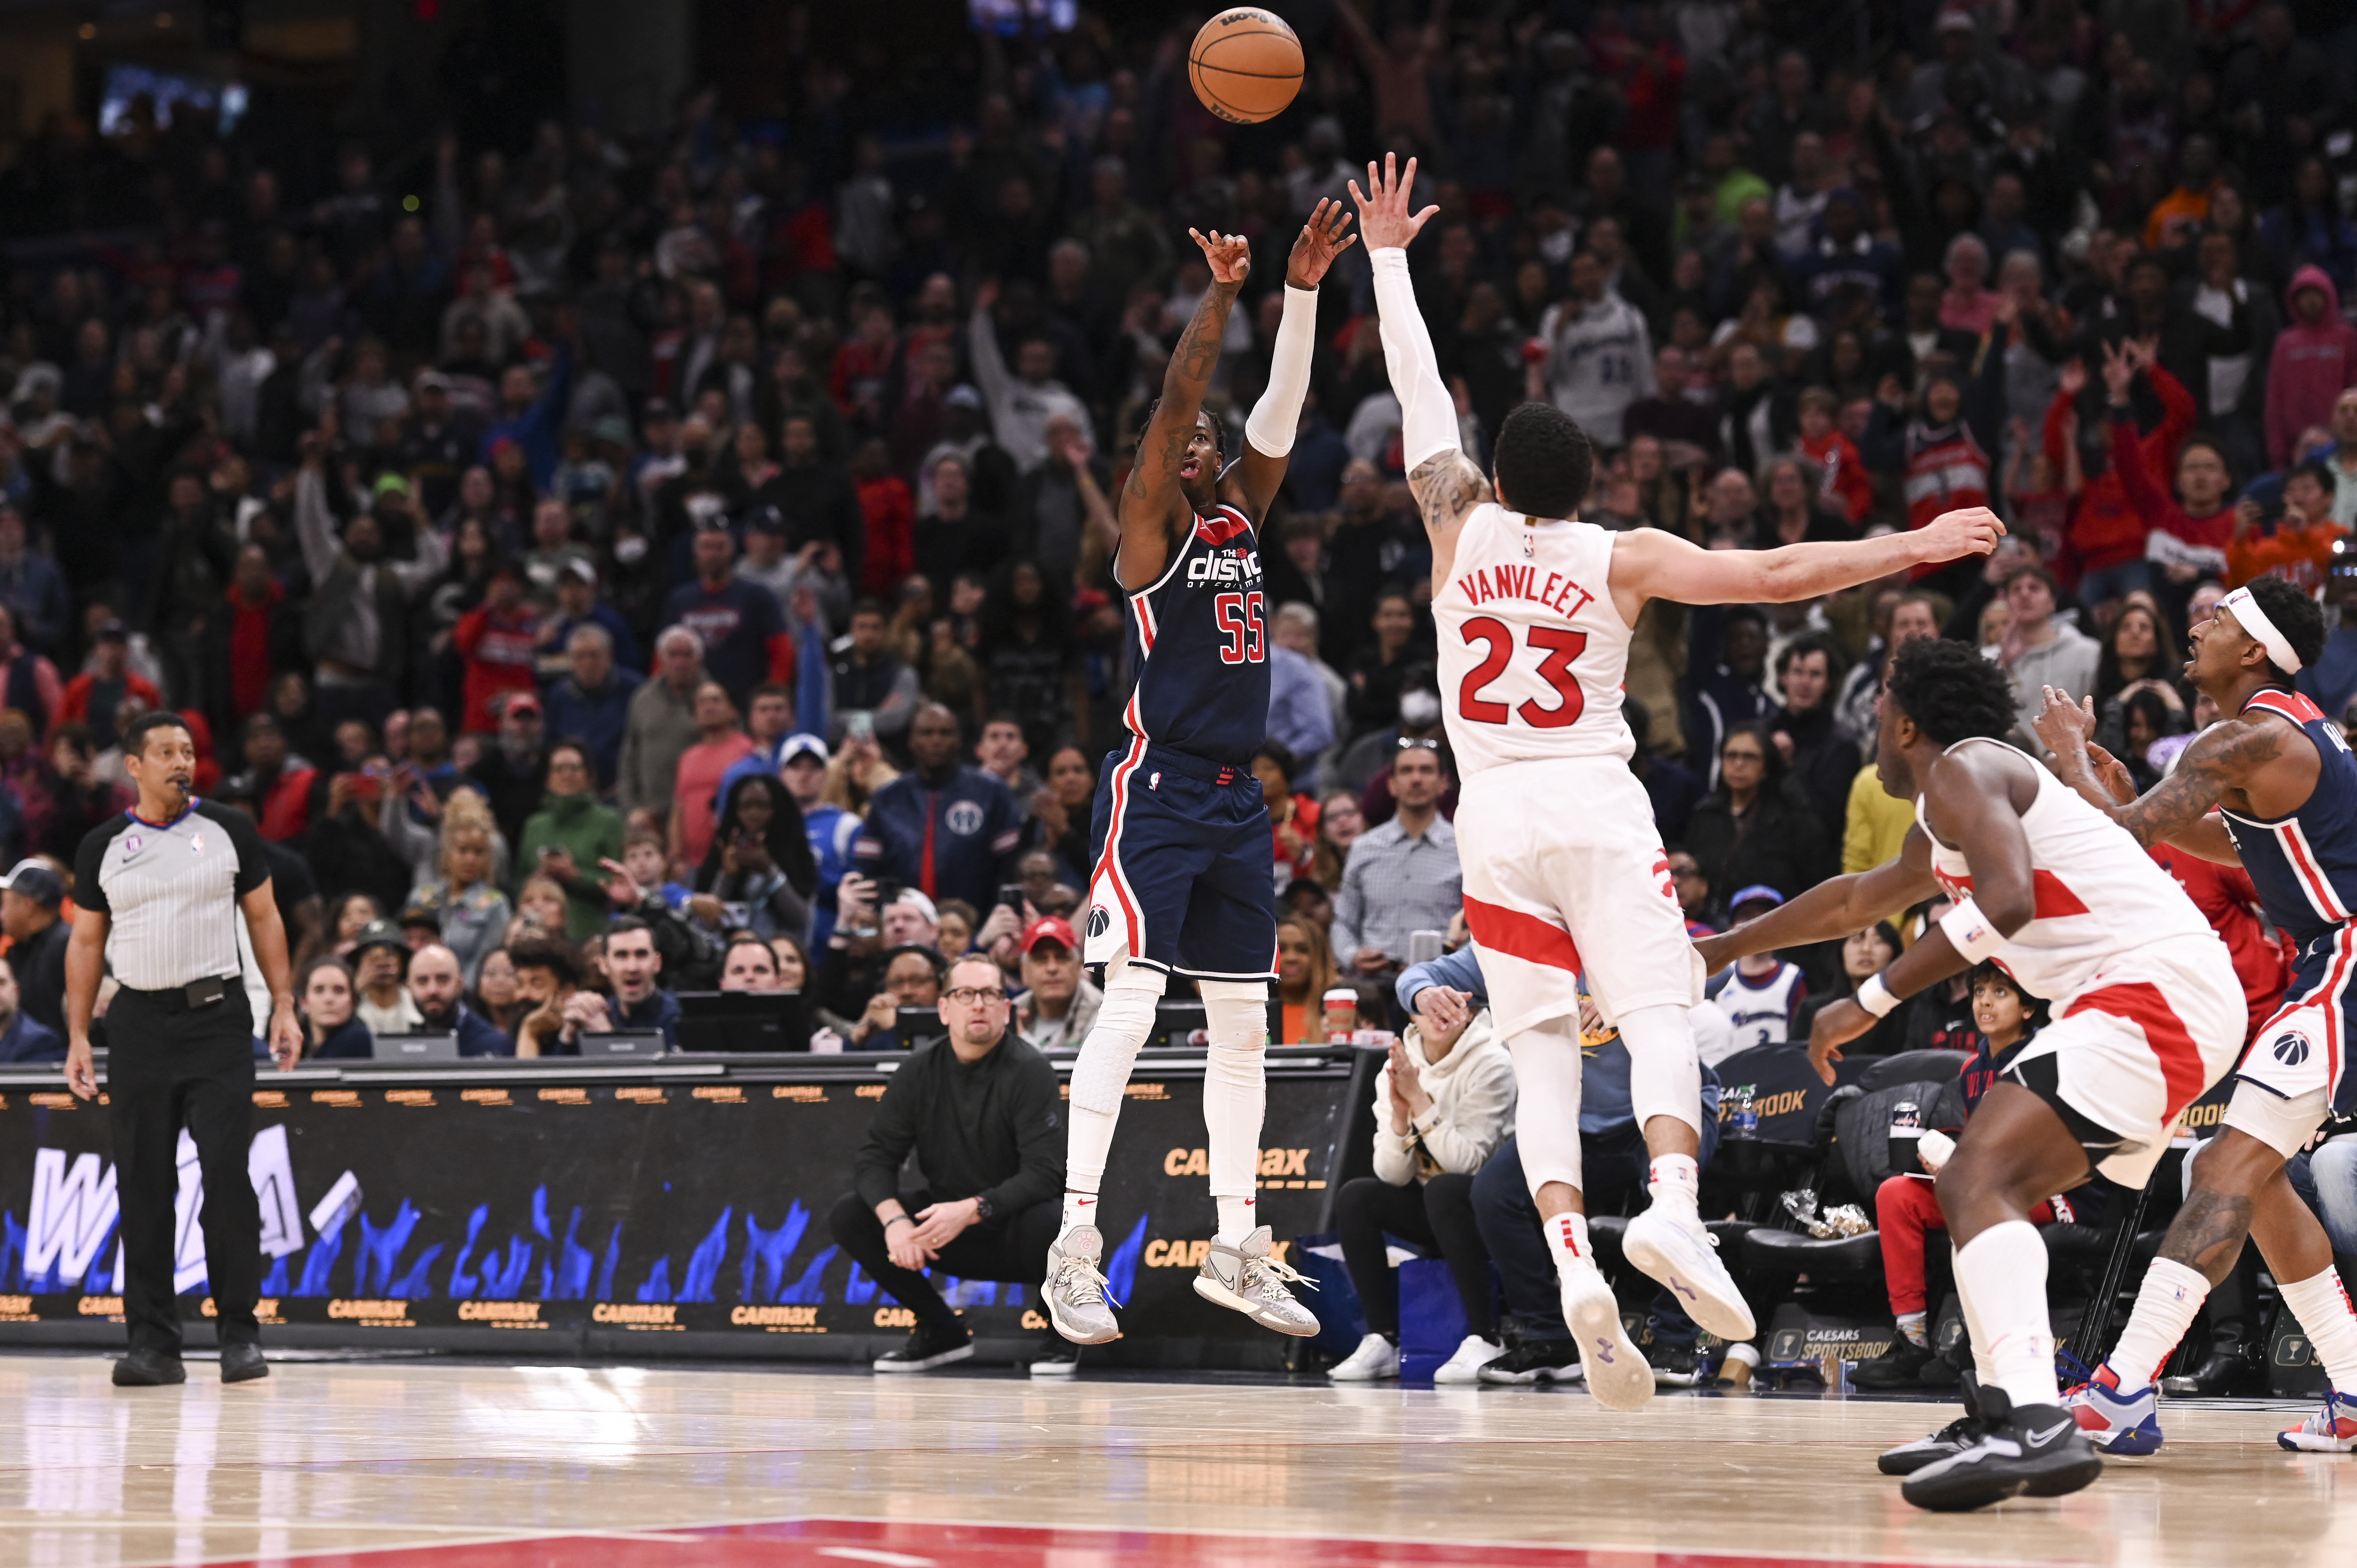 Wizards snap skid - Global Times